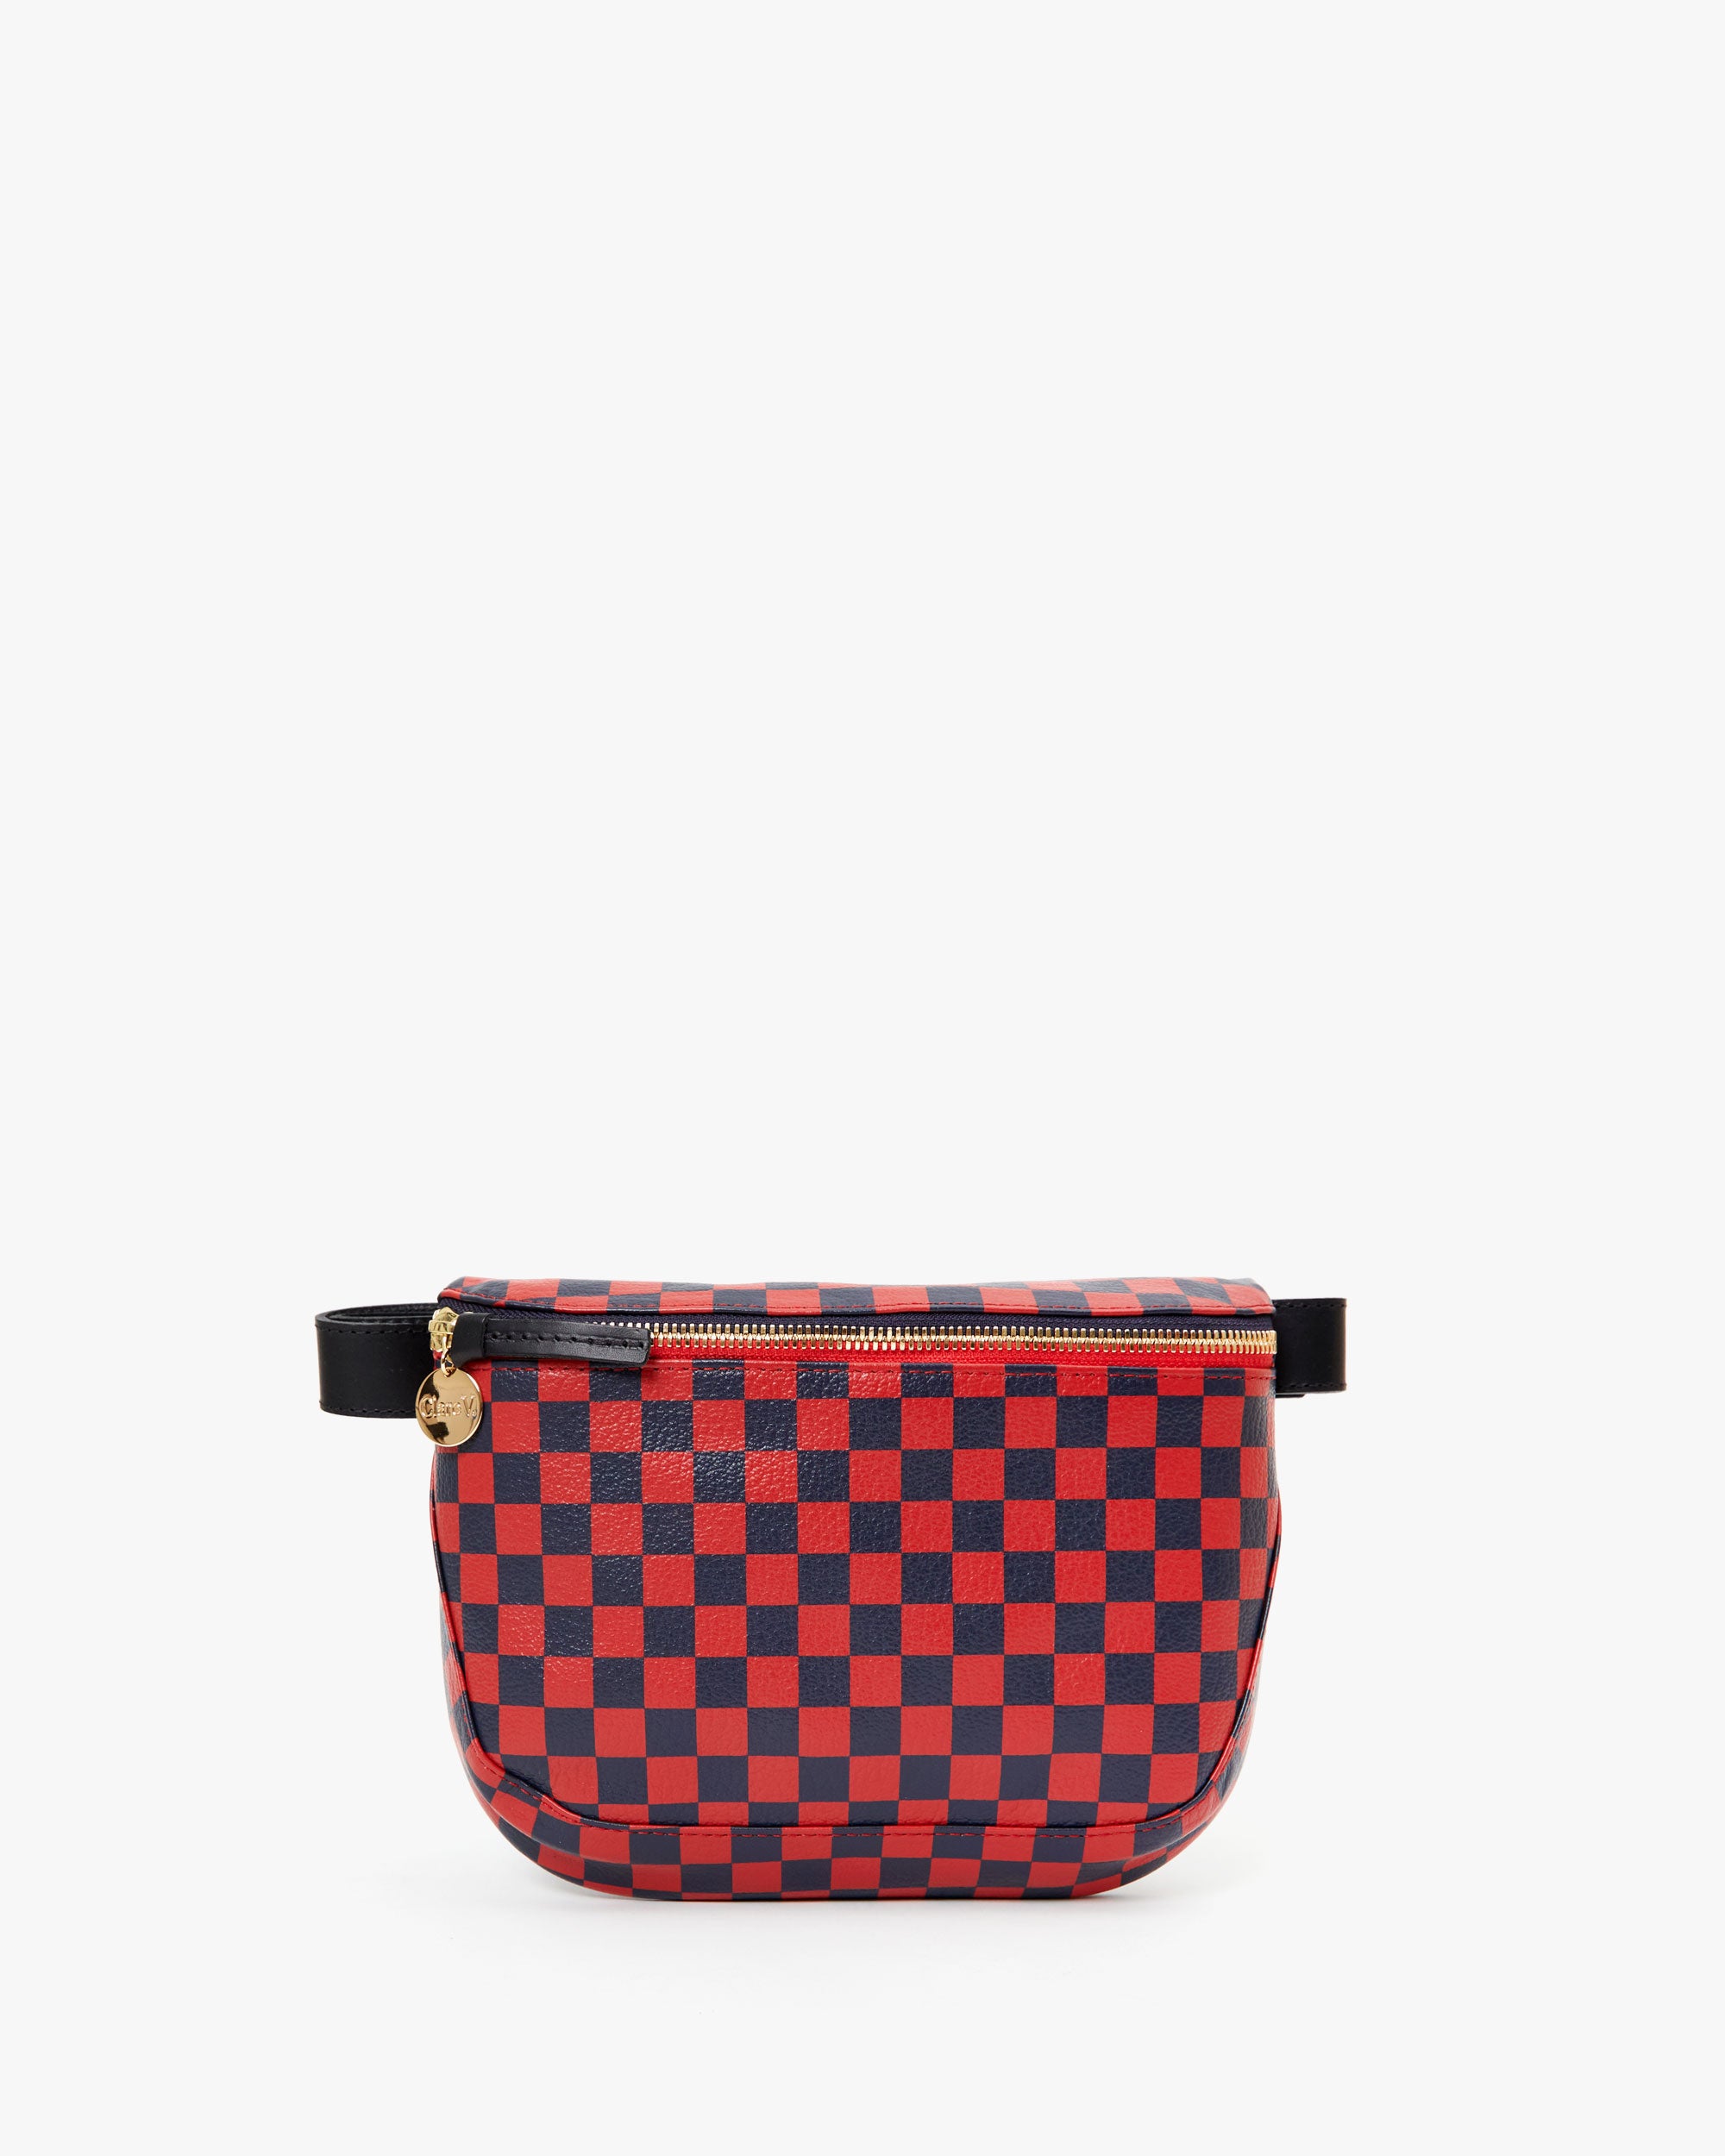 Clare V. Fanny Pack - Cherry Red/Navy Checkers